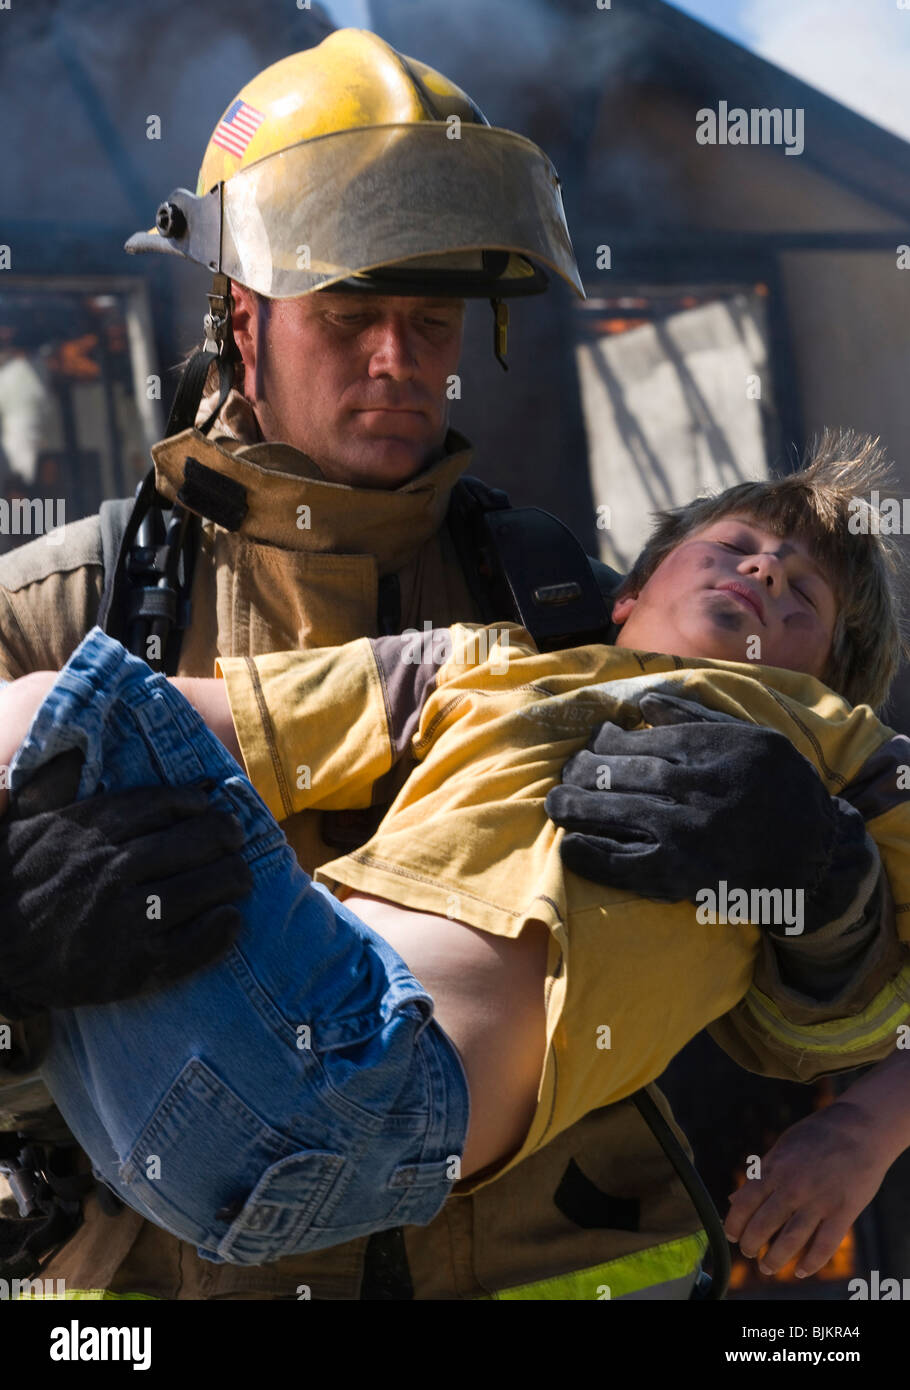 Fire fighter rescuing child Stock Photo